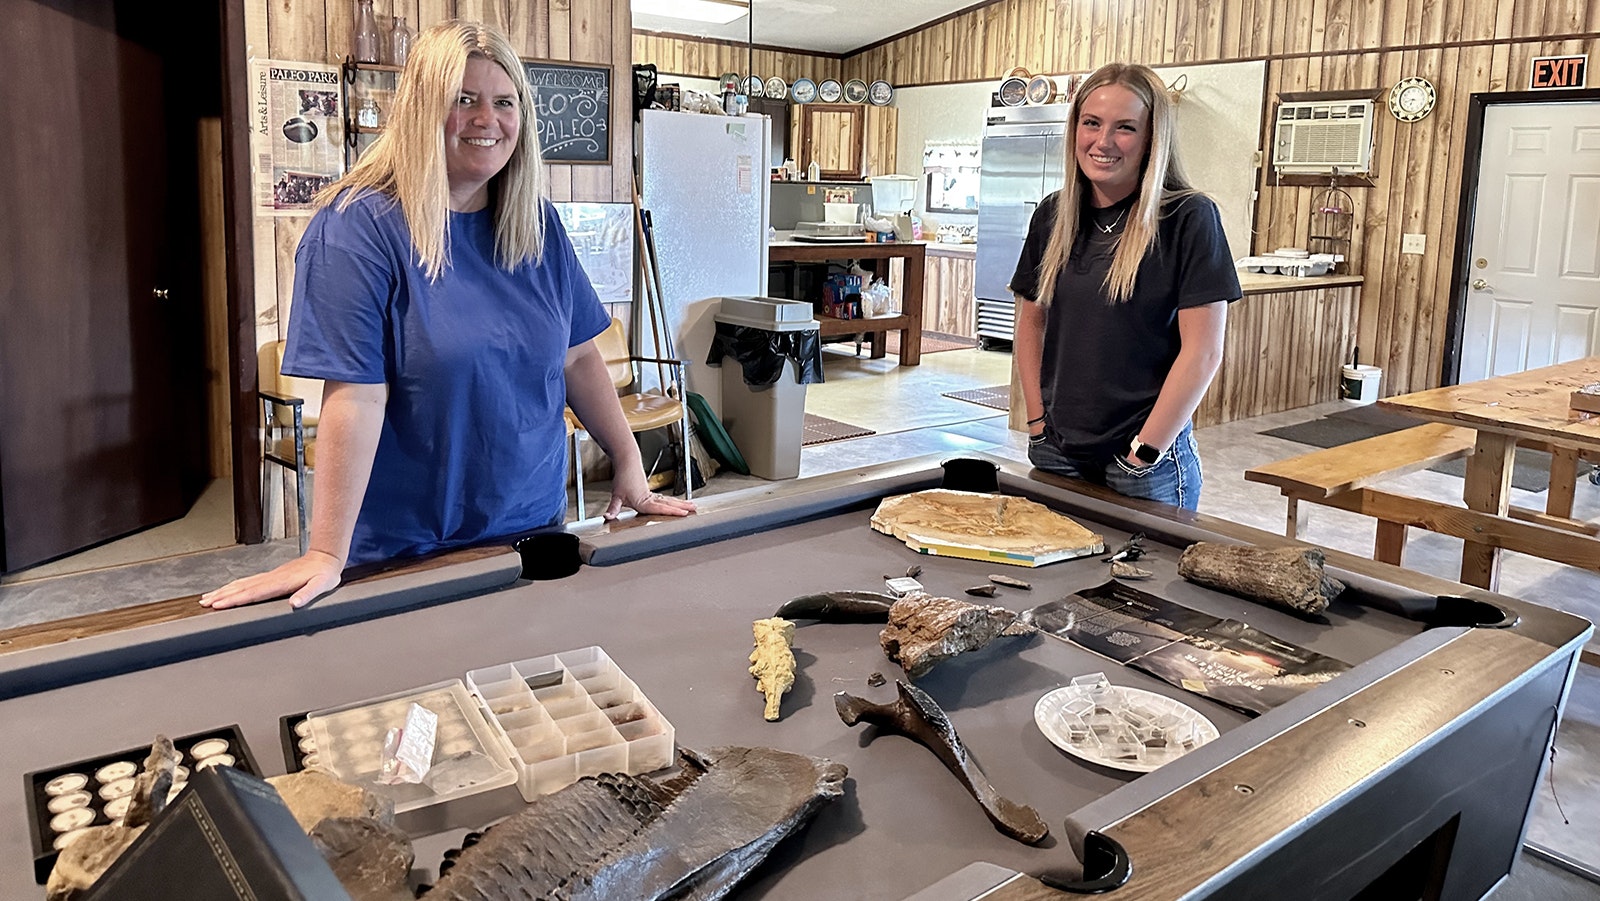 Kris and Kaden Stauffer stand in the Paleo Park Lodge on the Zerbst Ranch. The table contains replicas of various dinosaur fossils that were or could be found on their 7,000-acre property, which has already produced amazing dinosaur discoveries.